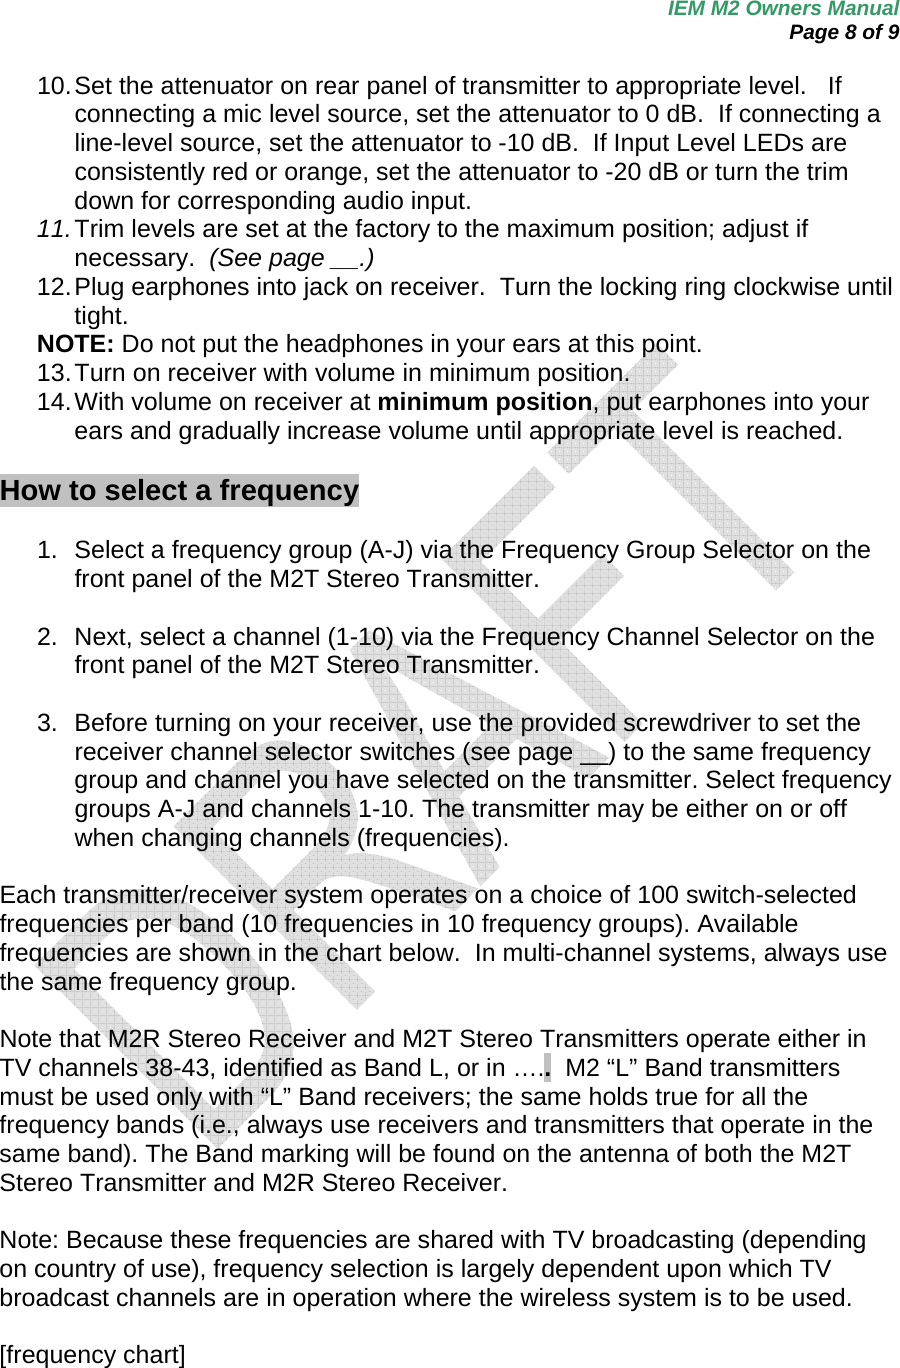 IEM M2 Owners Manual  Page 8 of 9  10. Set the attenuator on rear panel of transmitter to appropriate level.   If connecting a mic level source, set the attenuator to 0 dB.  If connecting a line-level source, set the attenuator to -10 dB.  If Input Level LEDs are consistently red or orange, set the attenuator to -20 dB or turn the trim down for corresponding audio input. 11. Trim levels are set at the factory to the maximum position; adjust if necessary.  (See page __.) 12. Plug earphones into jack on receiver.  Turn the locking ring clockwise until tight. NOTE: Do not put the headphones in your ears at this point. 13. Turn on receiver with volume in minimum position. 14. With volume on receiver at minimum position, put earphones into your ears and gradually increase volume until appropriate level is reached.  How to select a frequency  1.  Select a frequency group (A-J) via the Frequency Group Selector on the front panel of the M2T Stereo Transmitter.  2.  Next, select a channel (1-10) via the Frequency Channel Selector on the front panel of the M2T Stereo Transmitter.  3.  Before turning on your receiver, use the provided screwdriver to set the receiver channel selector switches (see page __) to the same frequency group and channel you have selected on the transmitter. Select frequency groups A-J and channels 1-10. The transmitter may be either on or off when changing channels (frequencies).      Each transmitter/receiver system operates on a choice of 100 switch-selected frequencies per band (10 frequencies in 10 frequency groups). Available frequencies are shown in the chart below.  In multi-channel systems, always use the same frequency group.  Note that M2R Stereo Receiver and M2T Stereo Transmitters operate either in TV channels 38-43, identified as Band L, or in …..  M2 “L” Band transmitters must be used only with “L” Band receivers; the same holds true for all the frequency bands (i.e., always use receivers and transmitters that operate in the same band). The Band marking will be found on the antenna of both the M2T Stereo Transmitter and M2R Stereo Receiver.   Note: Because these frequencies are shared with TV broadcasting (depending on country of use), frequency selection is largely dependent upon which TV broadcast channels are in operation where the wireless system is to be used.  [frequency chart]  